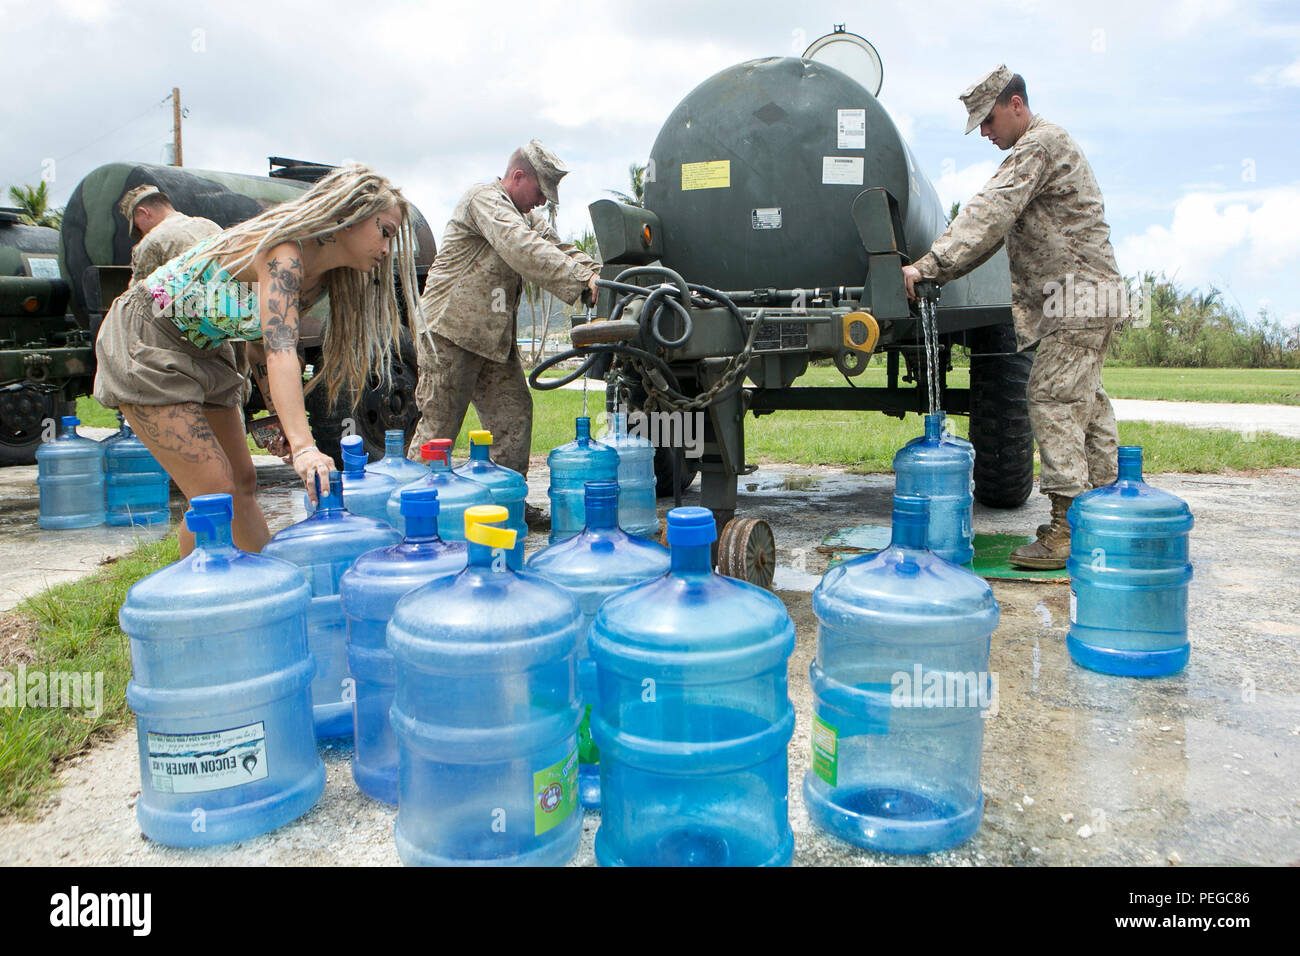 A young woman sets up her water jugs to be filled at a water distribution site set up by U.S. Marines from Combat Logistics Battalion 31, 31st Marine Expeditionary Unit, as part of typhoon relief efforts in Saipan, Aug. 11, 2015. The 31st MEU and the ships of the Bonhomme Richard Amphibious Ready Group are assisting the Federal Emergency Management Agency with distributing emergency relief supplies to Saipan after the island was struck by Typhoon Soudelor, Aug. 2-3. (U.S. Marine Corps photo by Lance Cpl. Brian Bekkala/Released.) Stock Photo